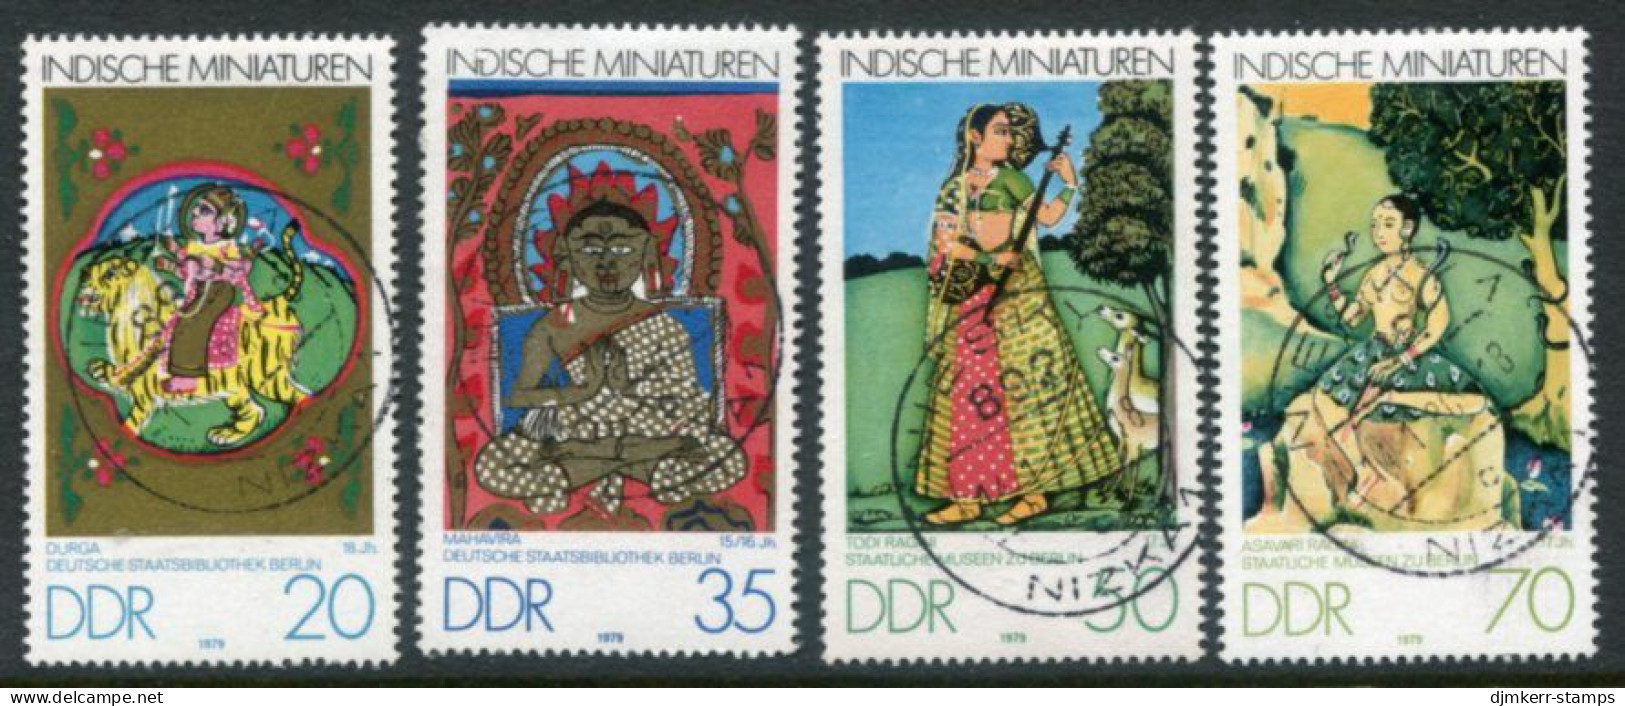 DDR / E. GERMANY 1979 Indian Miniatures Used.  Michel  2418-21 - Gebraucht